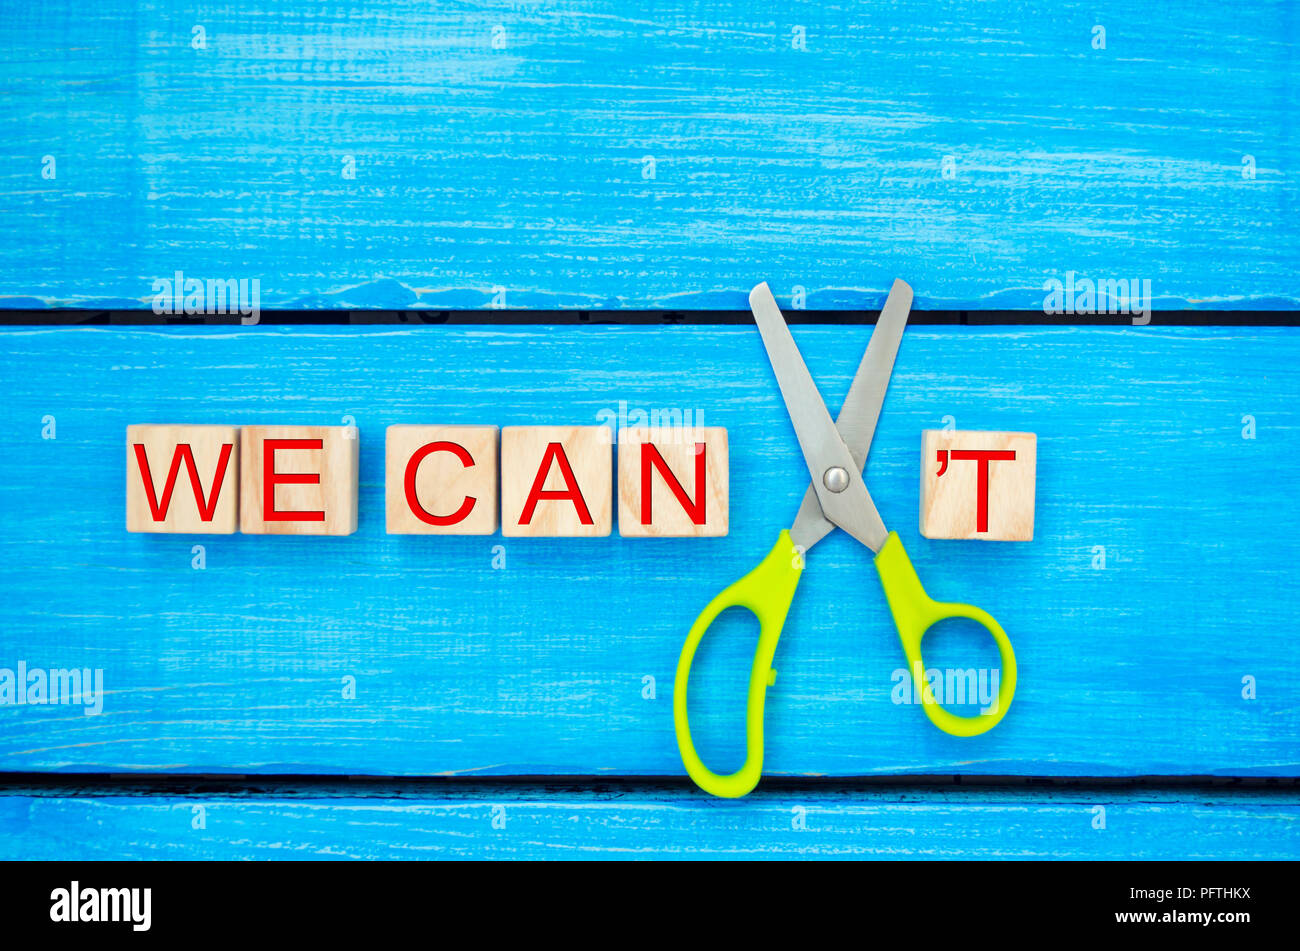 we can self motivation - cutting the letter t of the written word we can't so it says we can, goal achievement, potential, overcoming Stock Photo